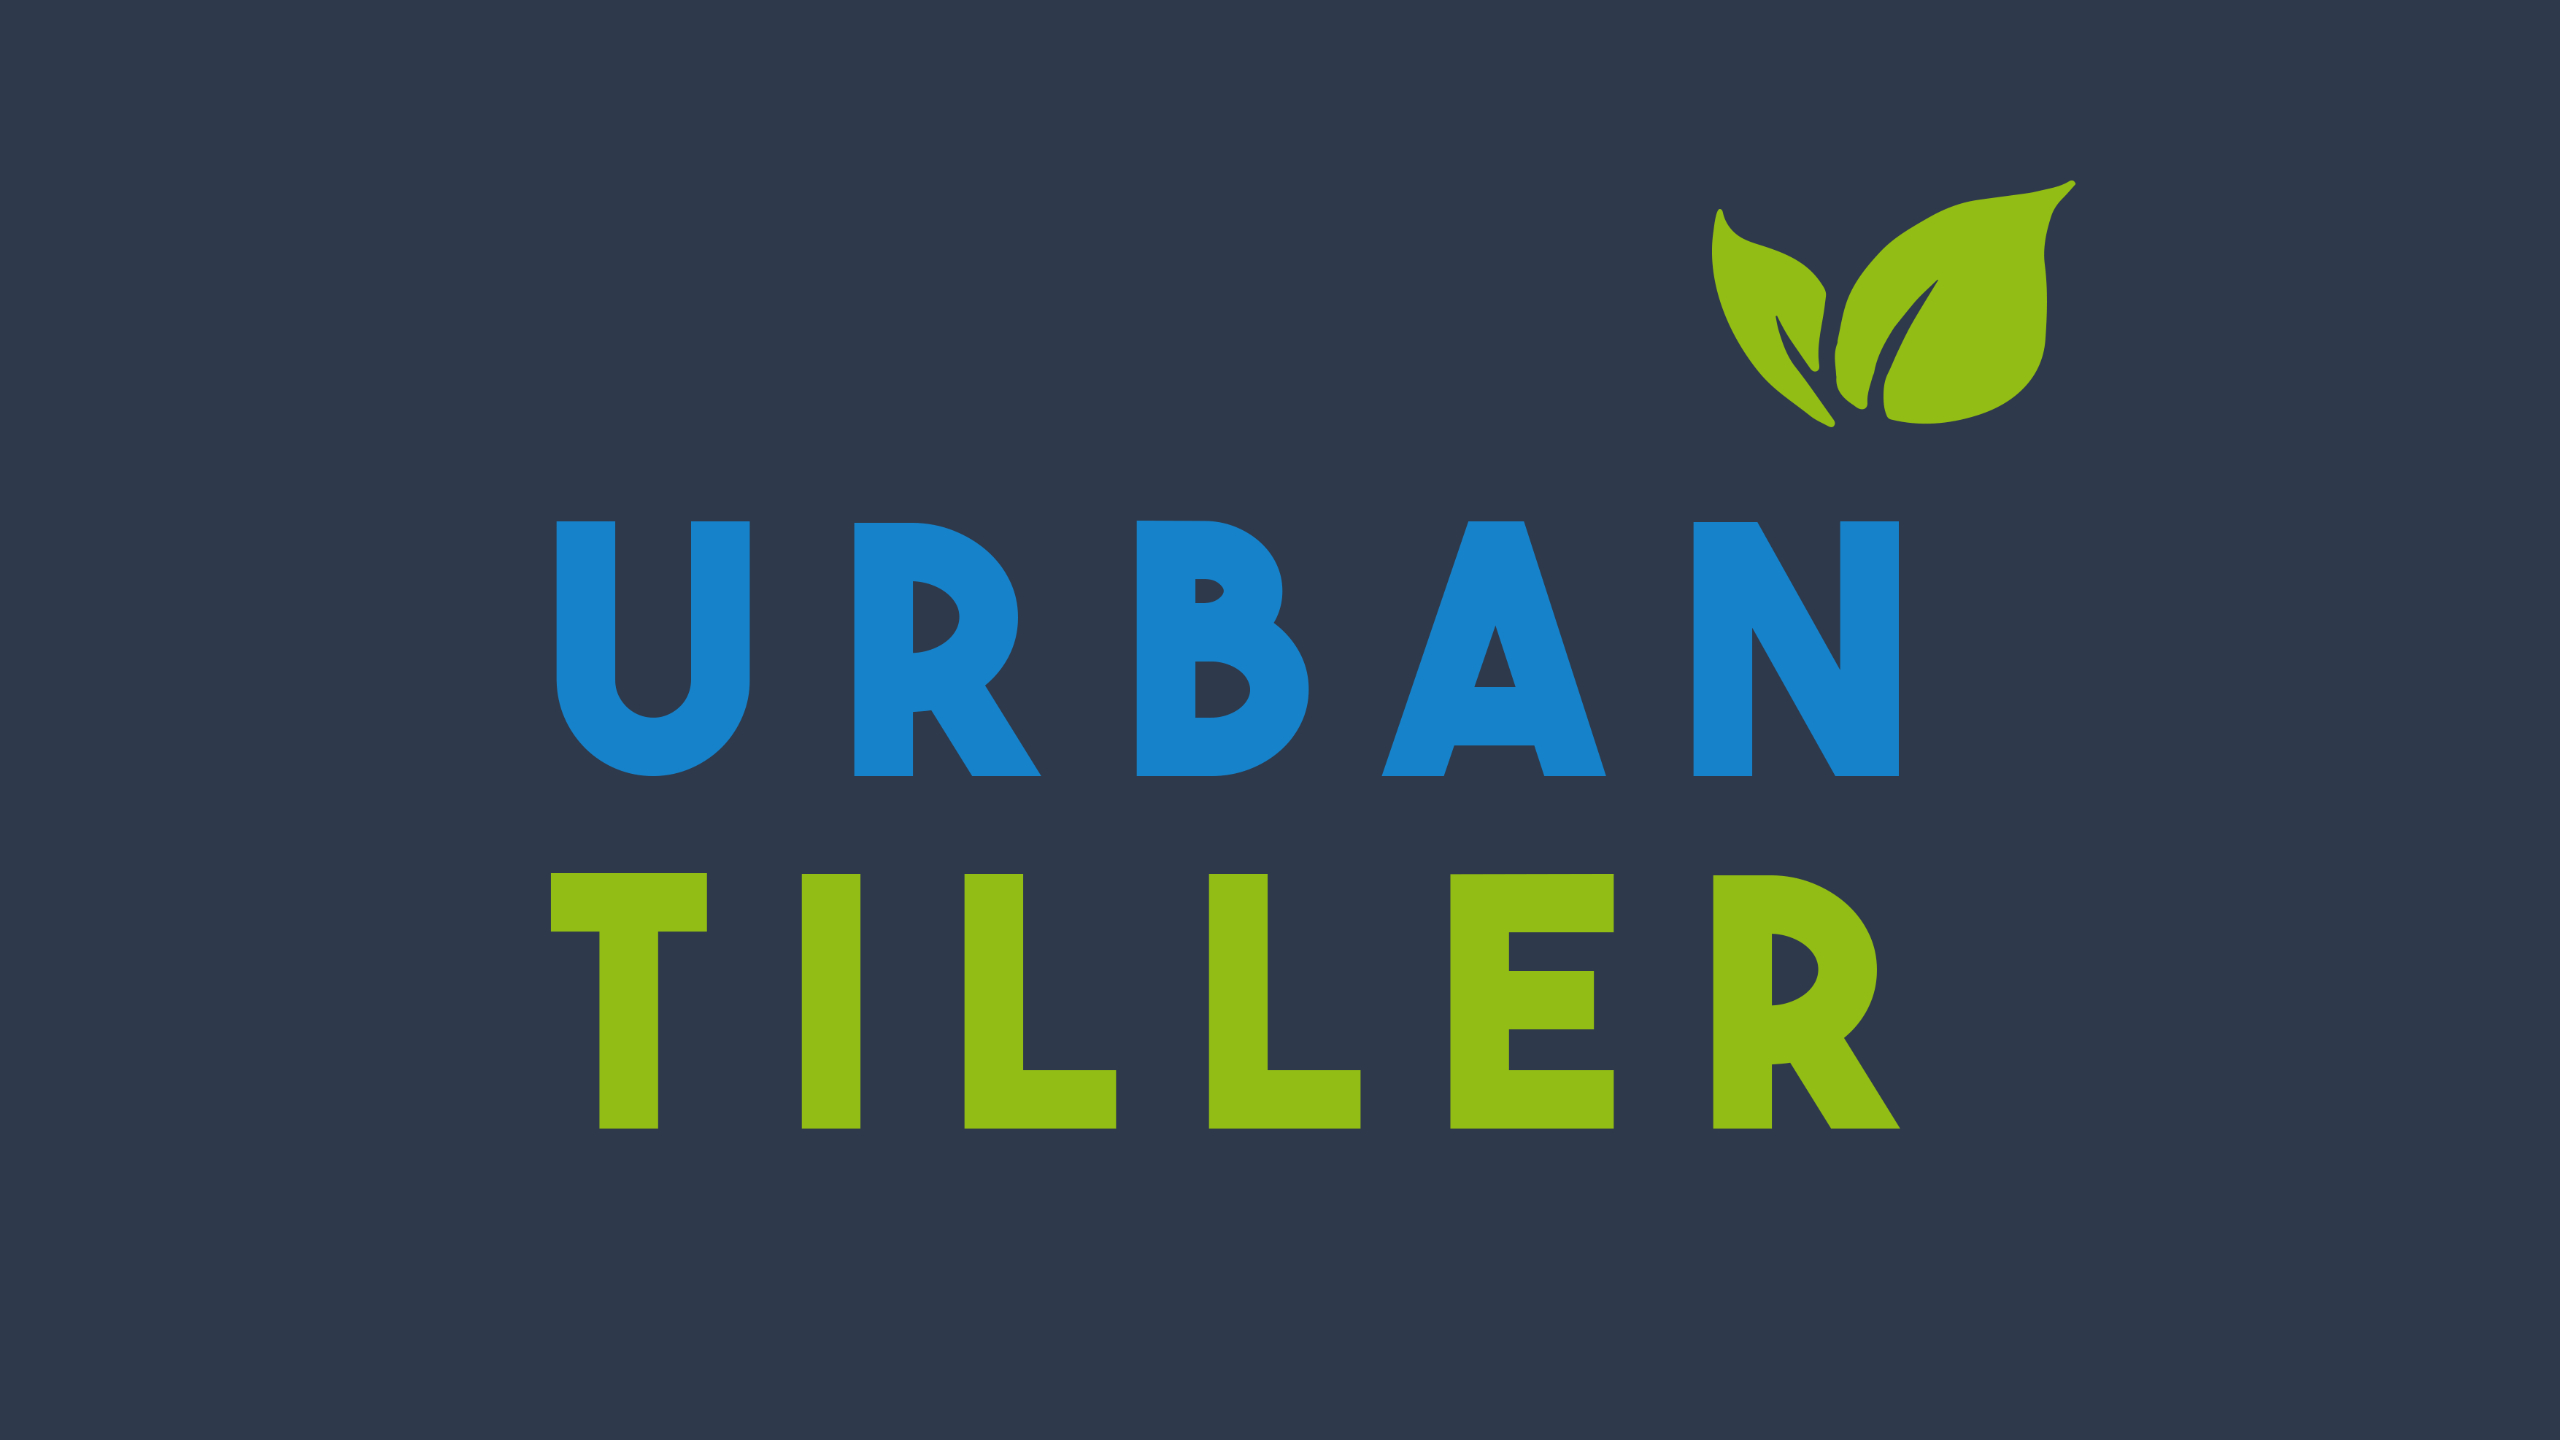 This is a photo of the Urban Tiller logo.